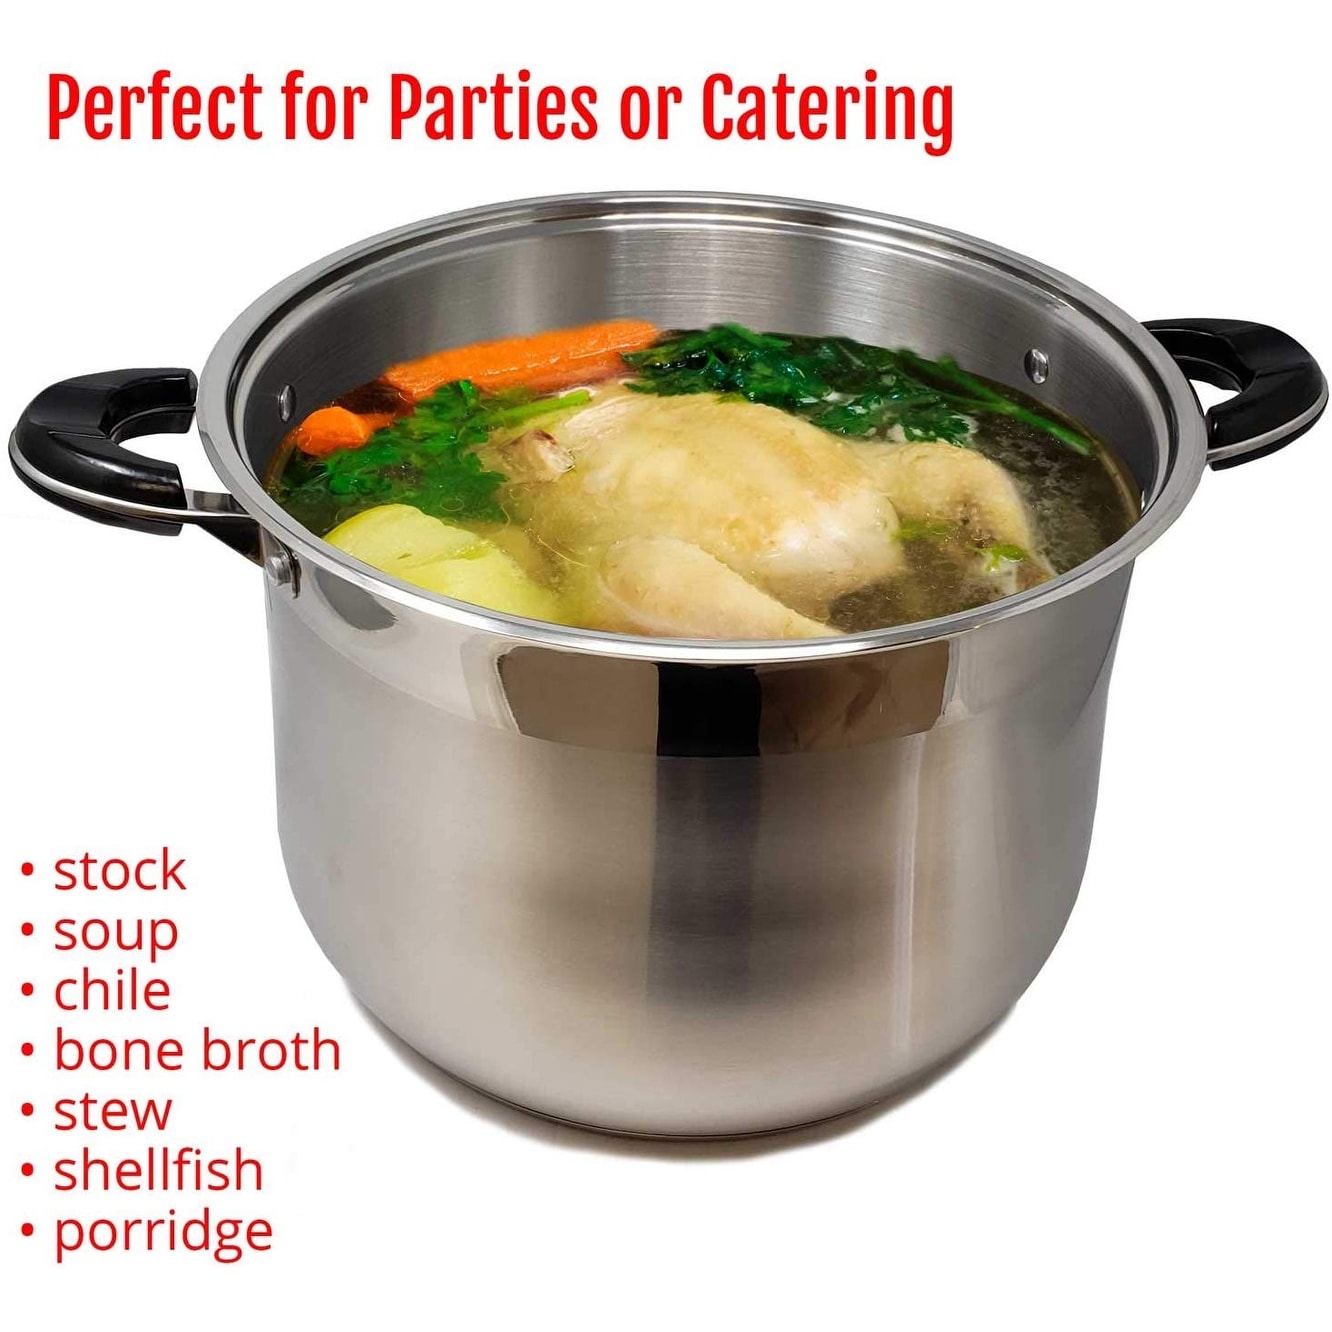 20 qt, 12-3/8 Diameter Stock Pot with Lid, Stainless Steel